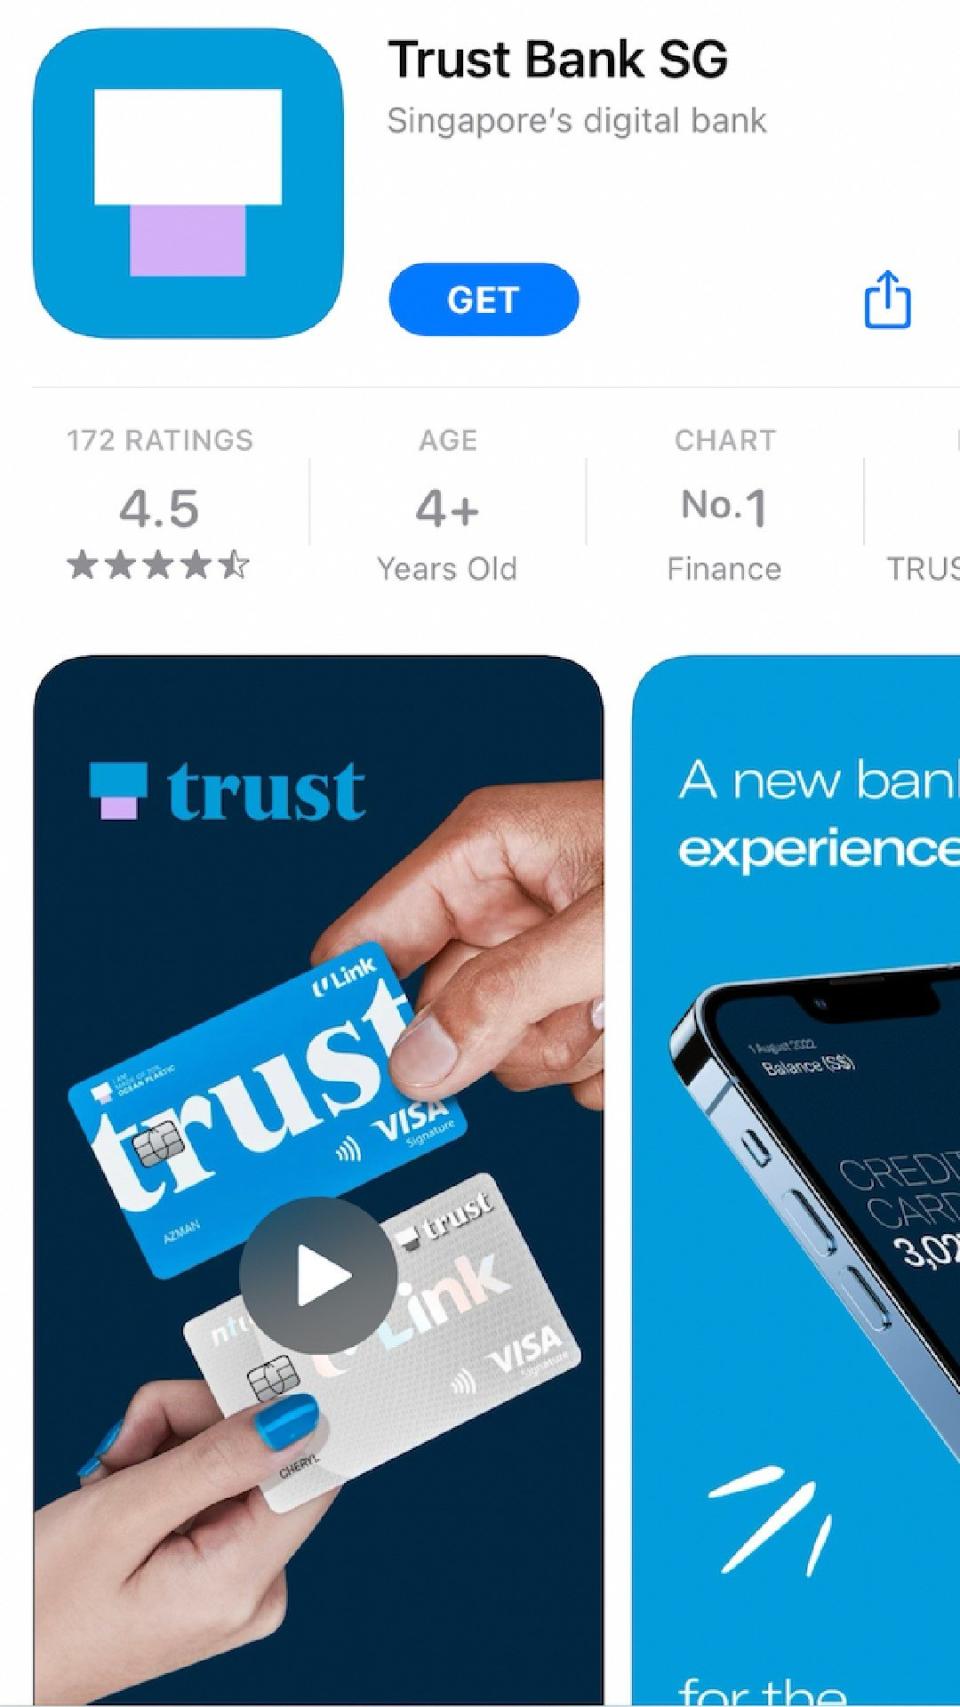 To apply for a Trust credit card, you'll need to first download the Trust Bank mobile app.